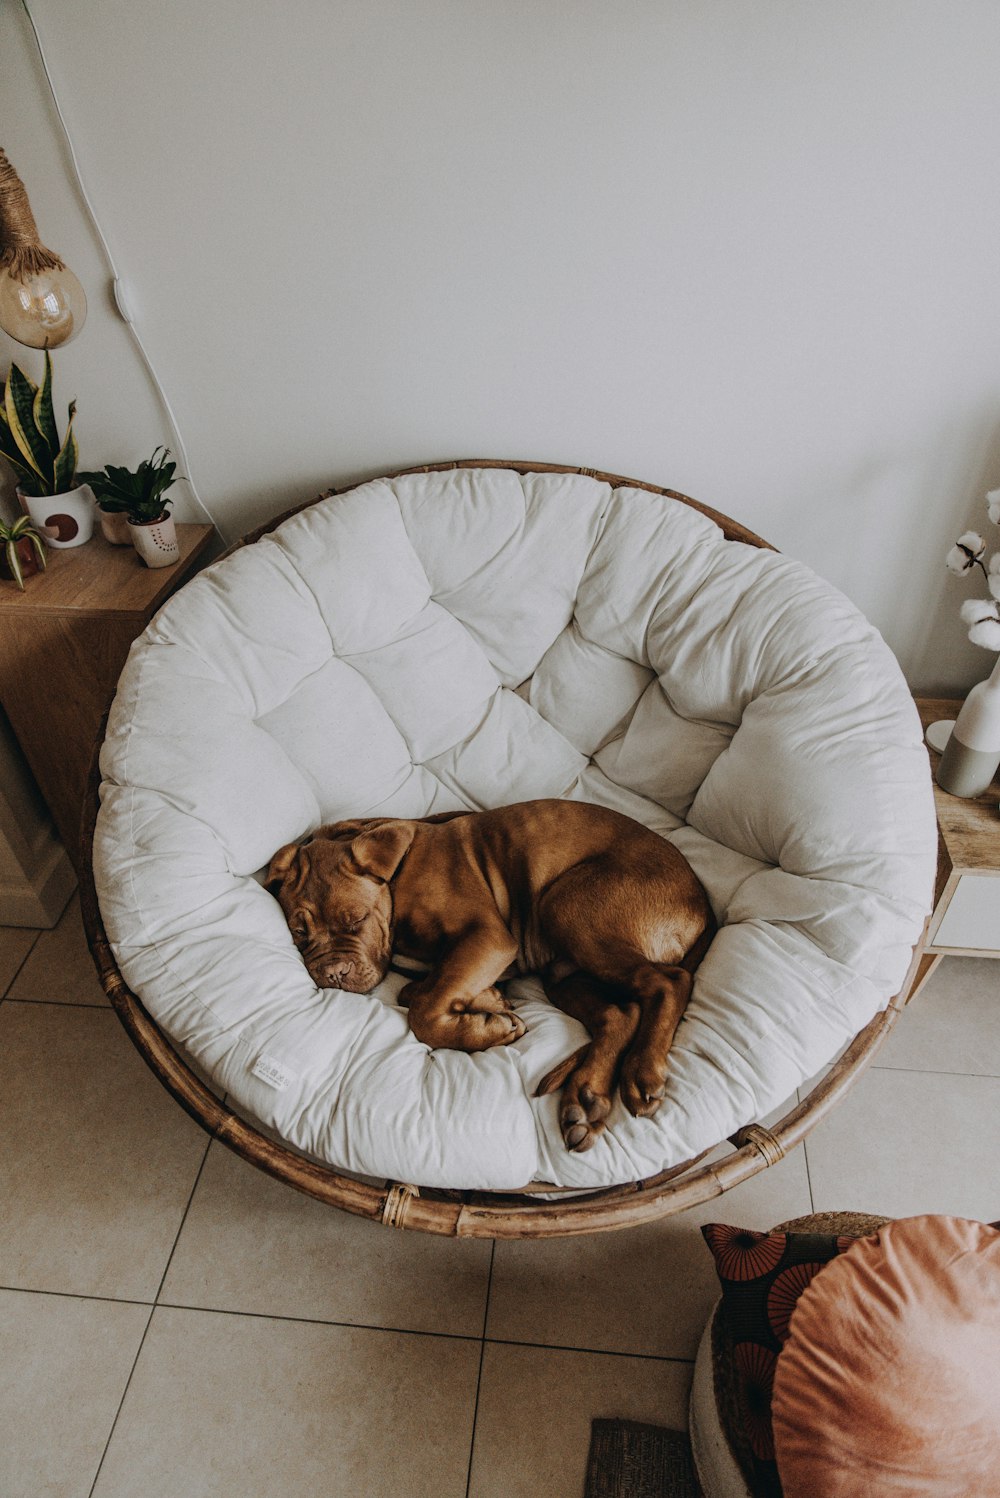 brown short coated dog lying on white round pet bed